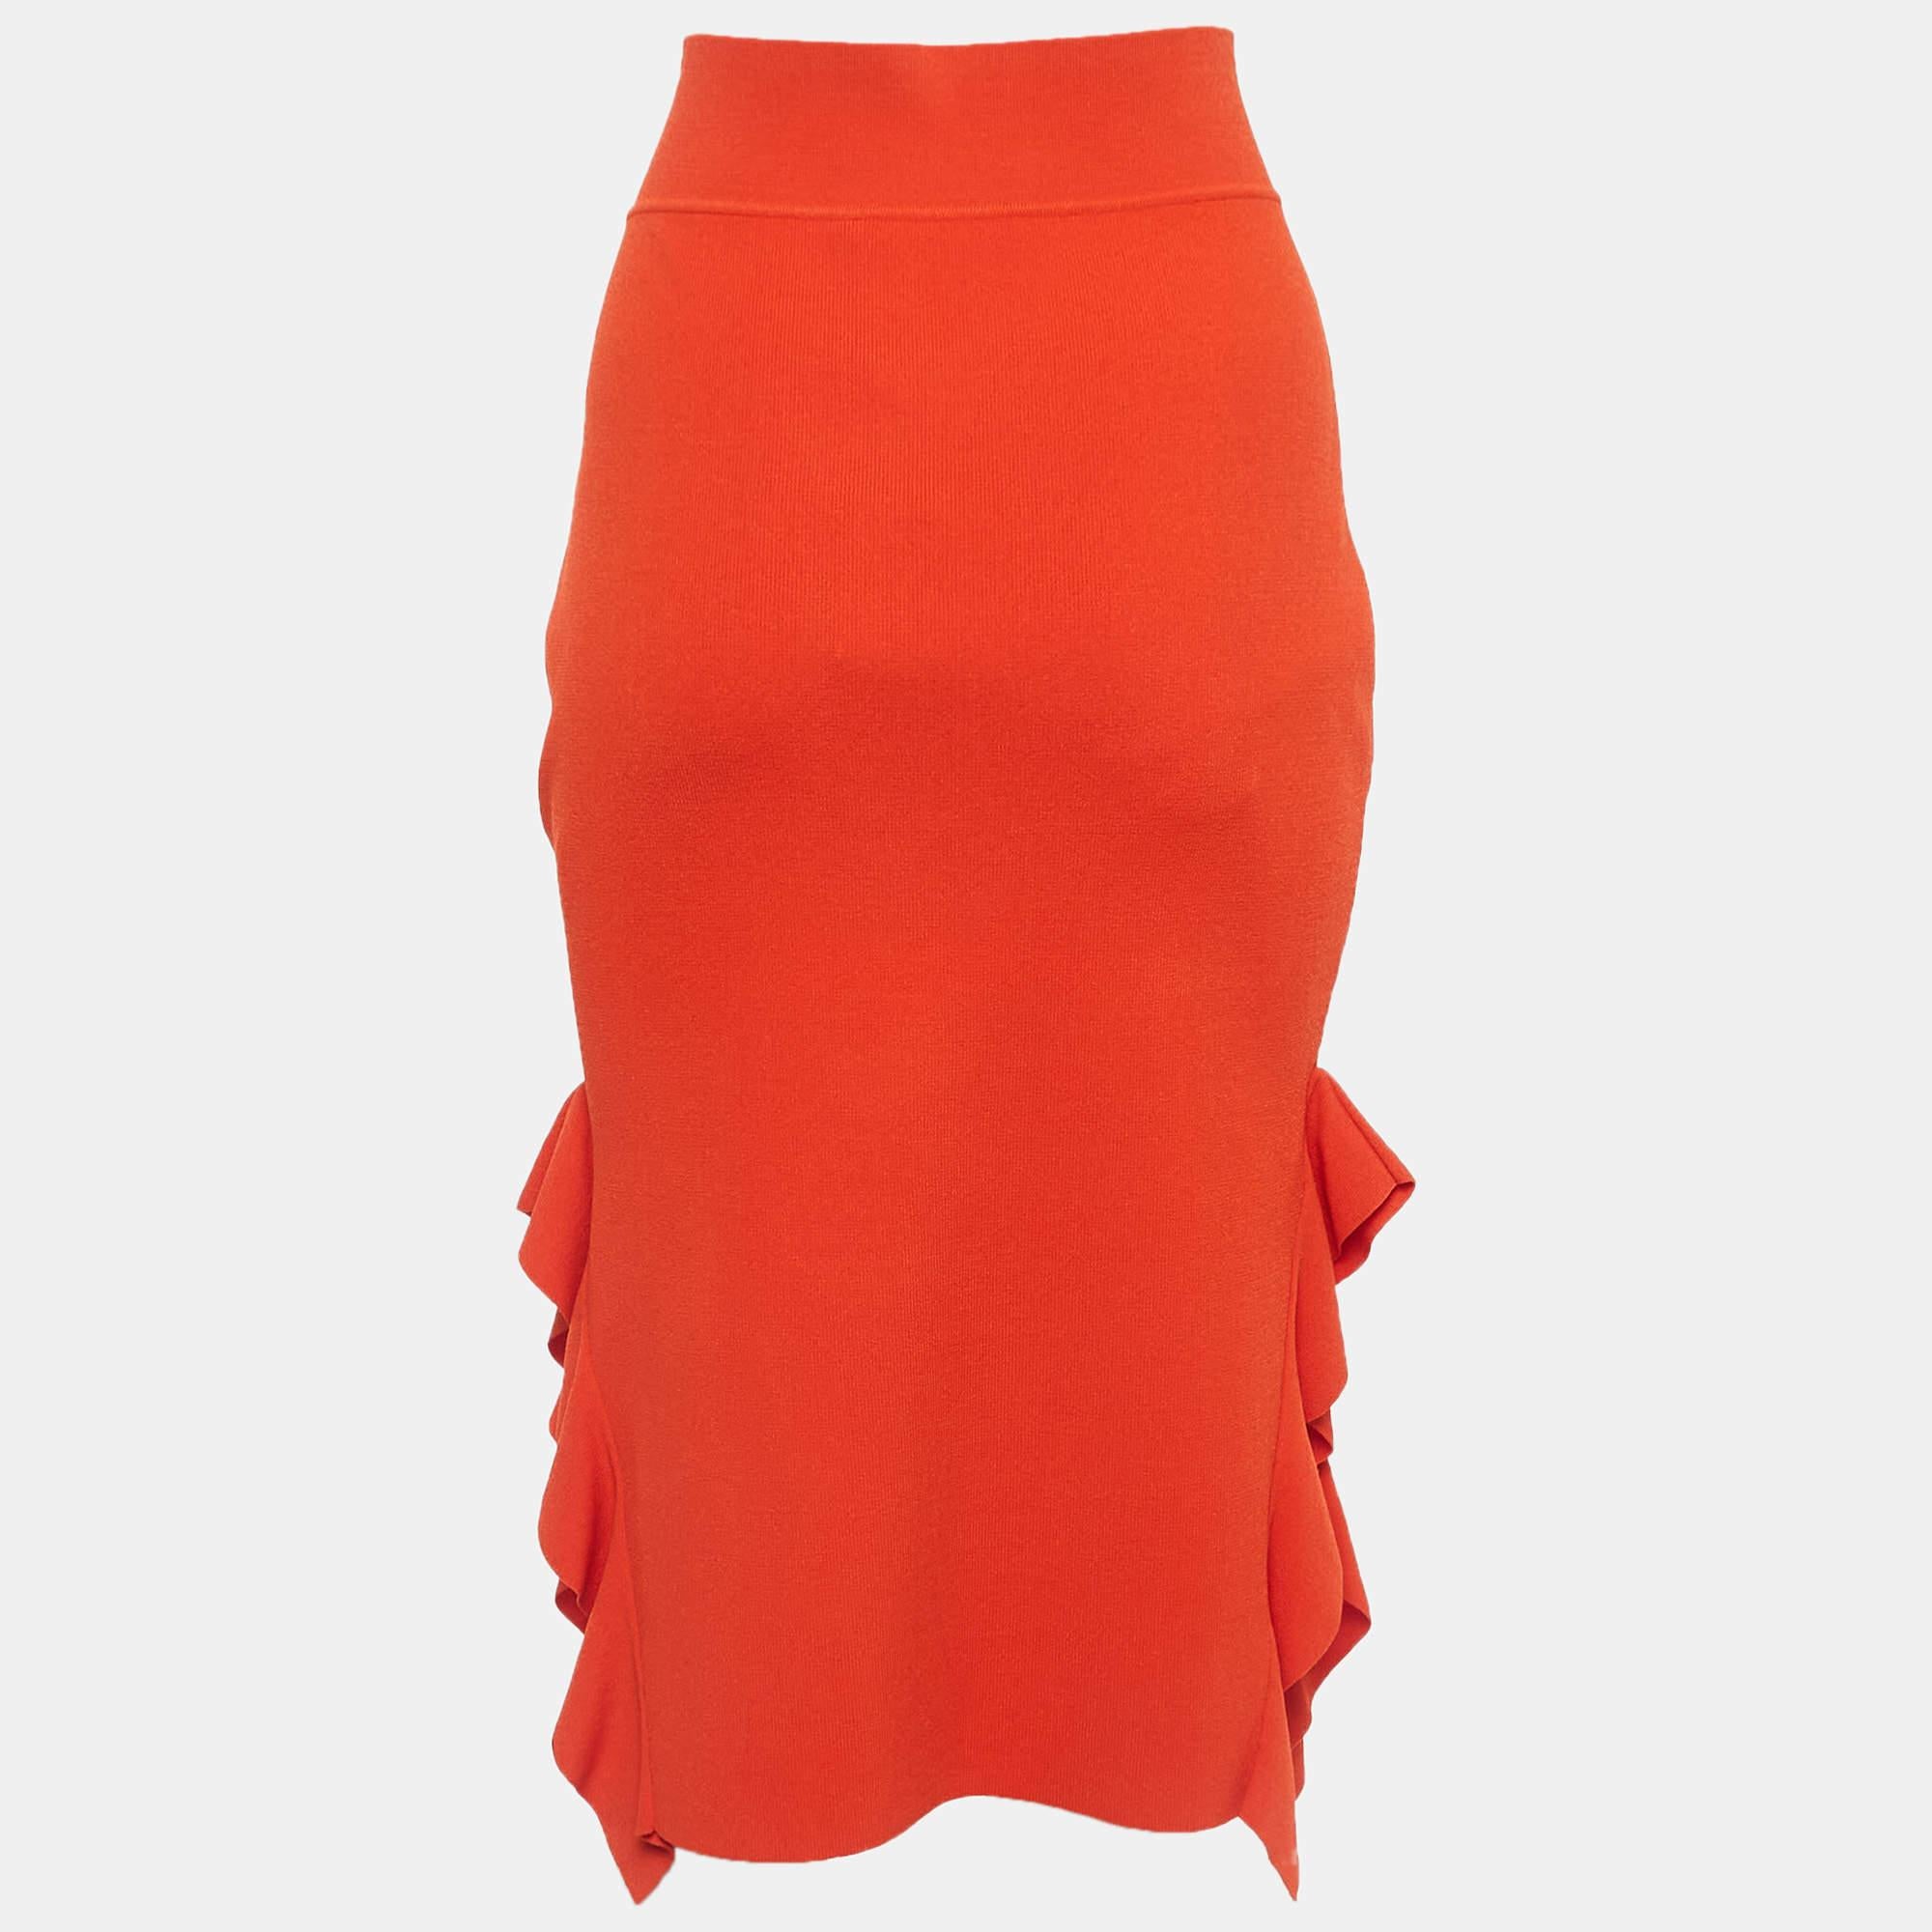 This elegant skirt is worth adding to your closet! Crafted from fine materials, it is exquisitely designed into a flattering shape. Cascading ruffles frame the split sides and add a sweet finish to this curve-hugging pencil skirt by Opening